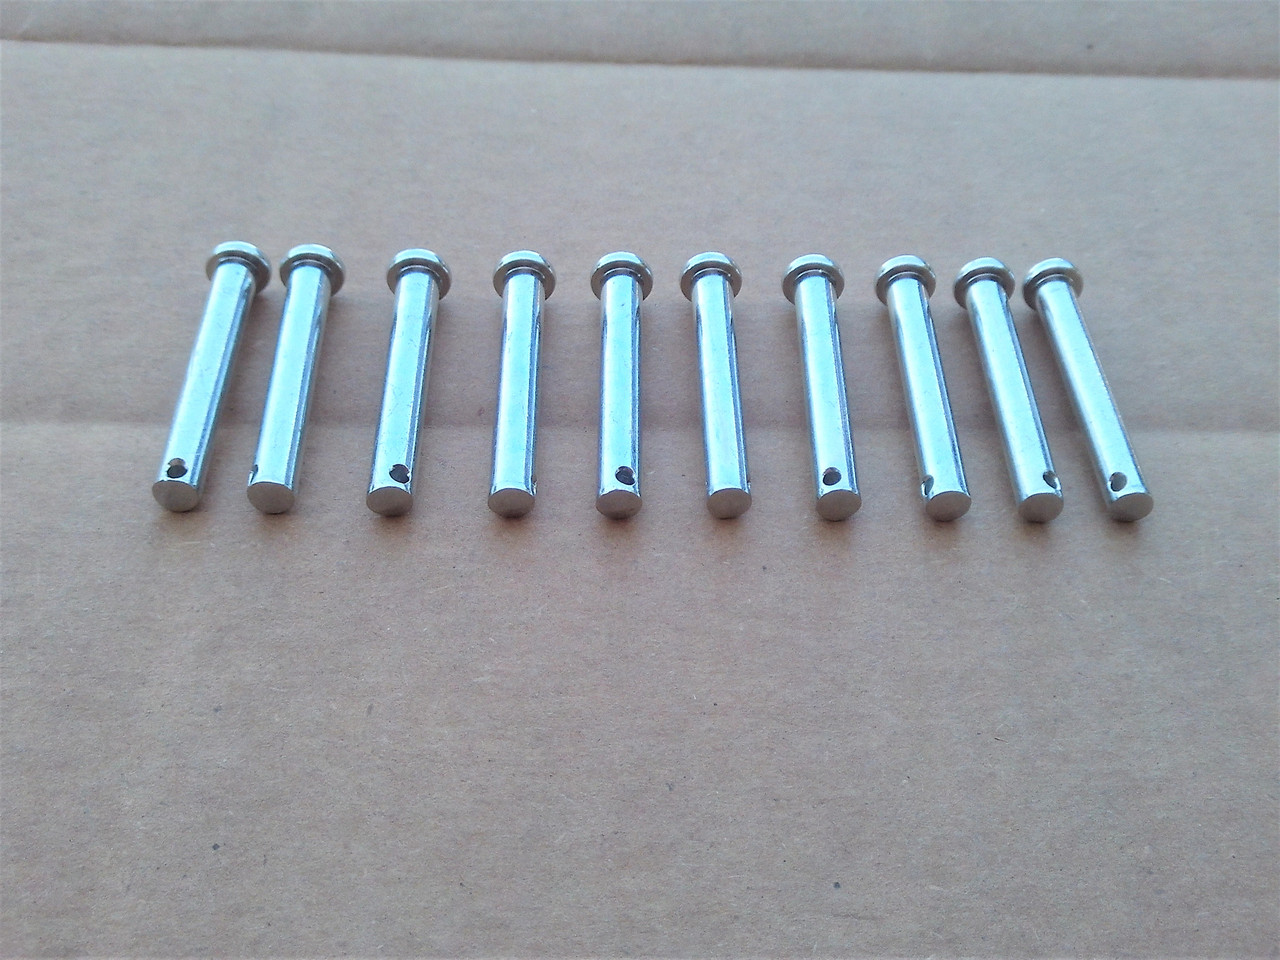 Shear Pins for Simplicity 1668344SM, 1686806YP, 703063 Snowthrower, snowblower, snow blower thrower Shop Pack of 10